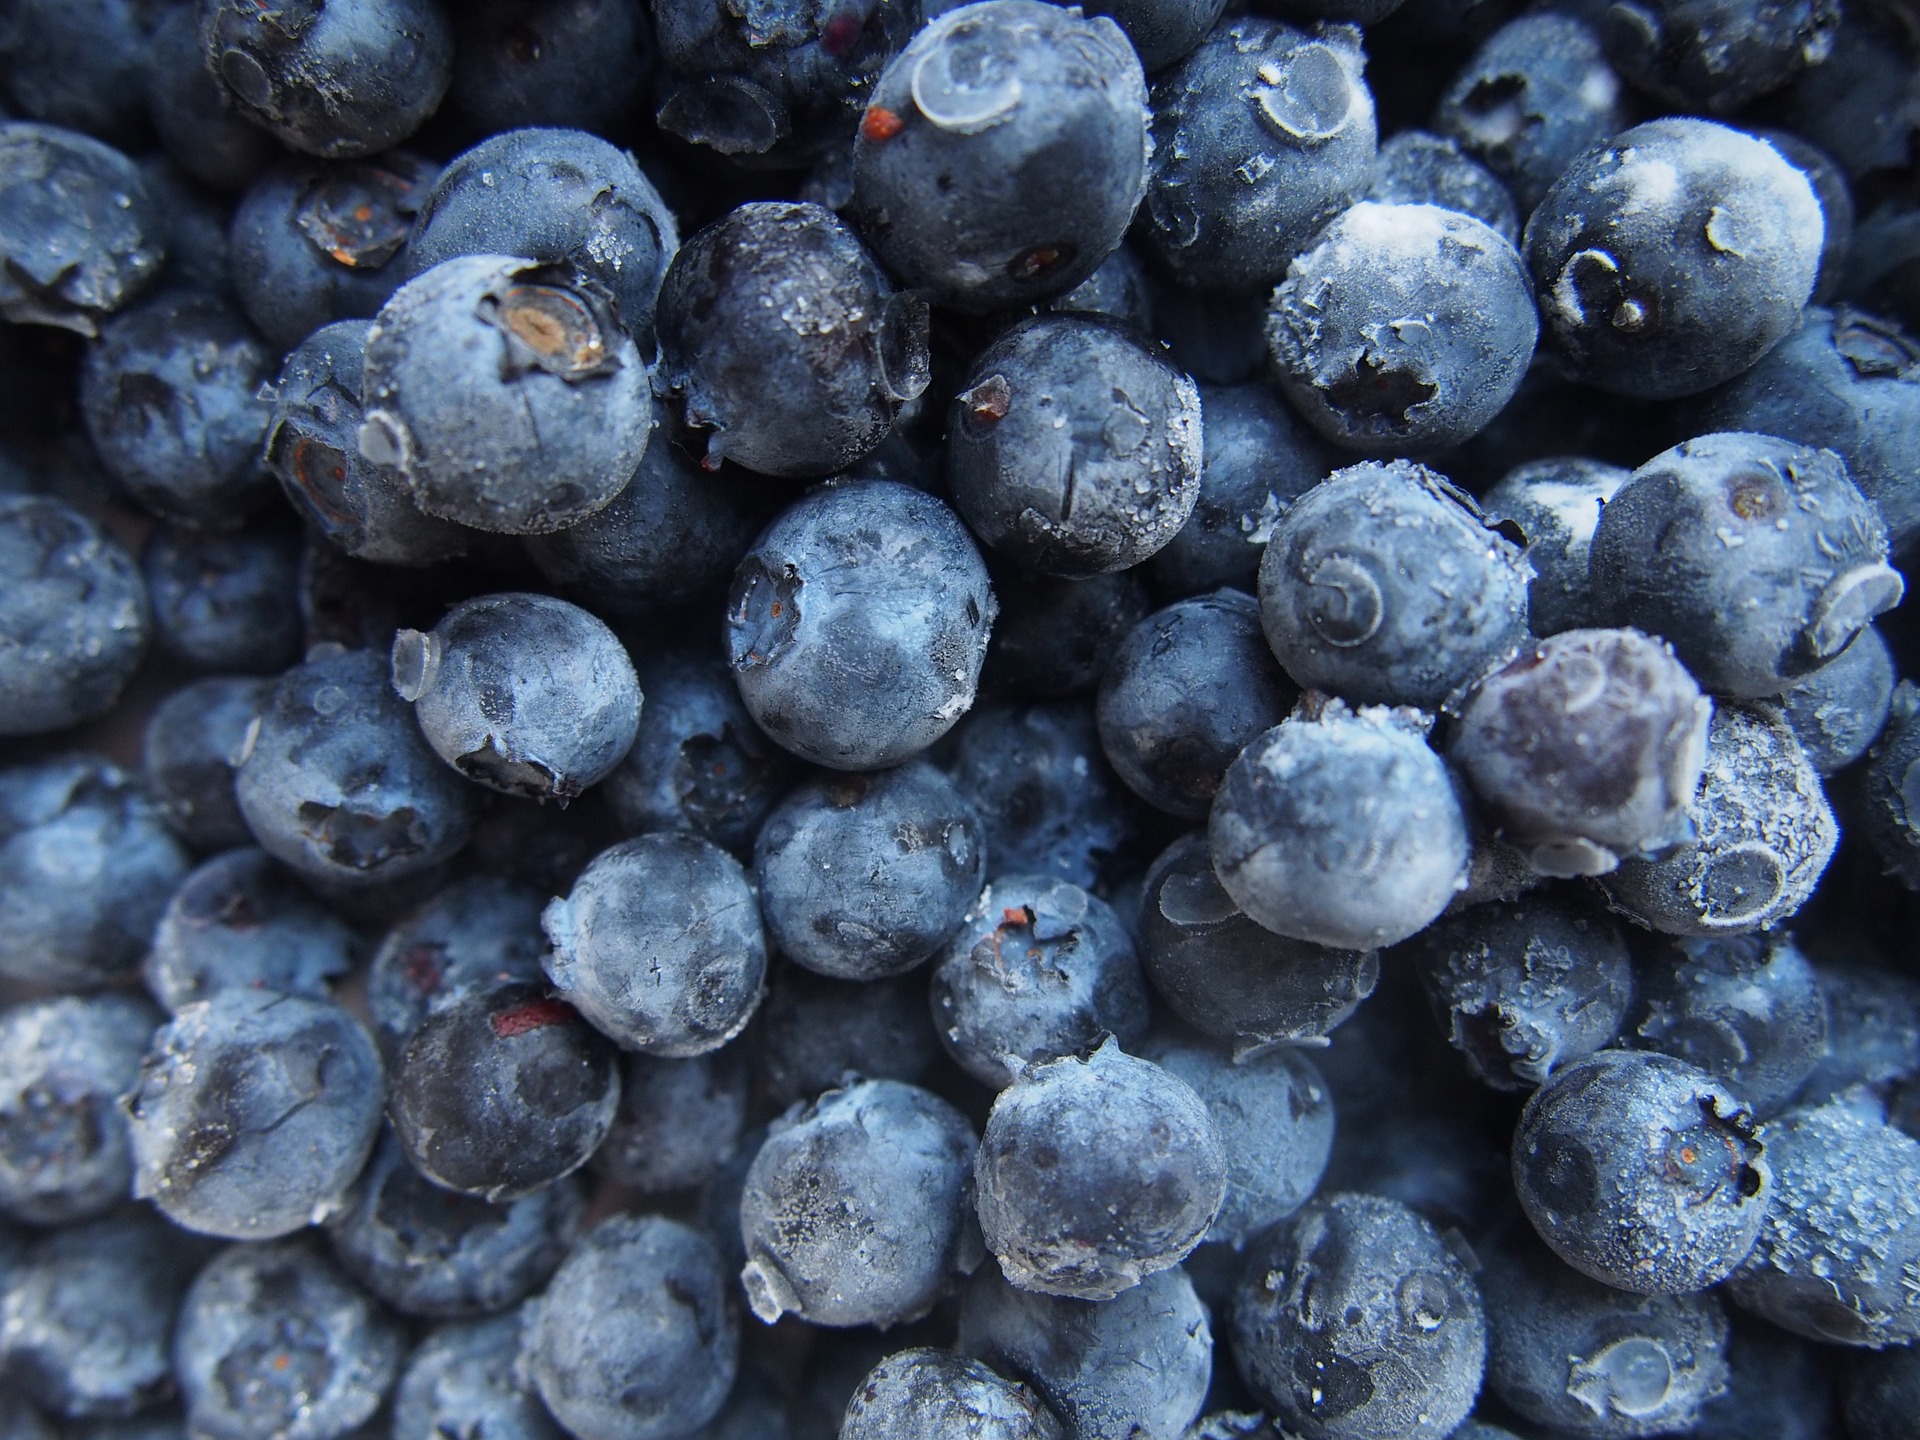 Do blueberries have seeds?